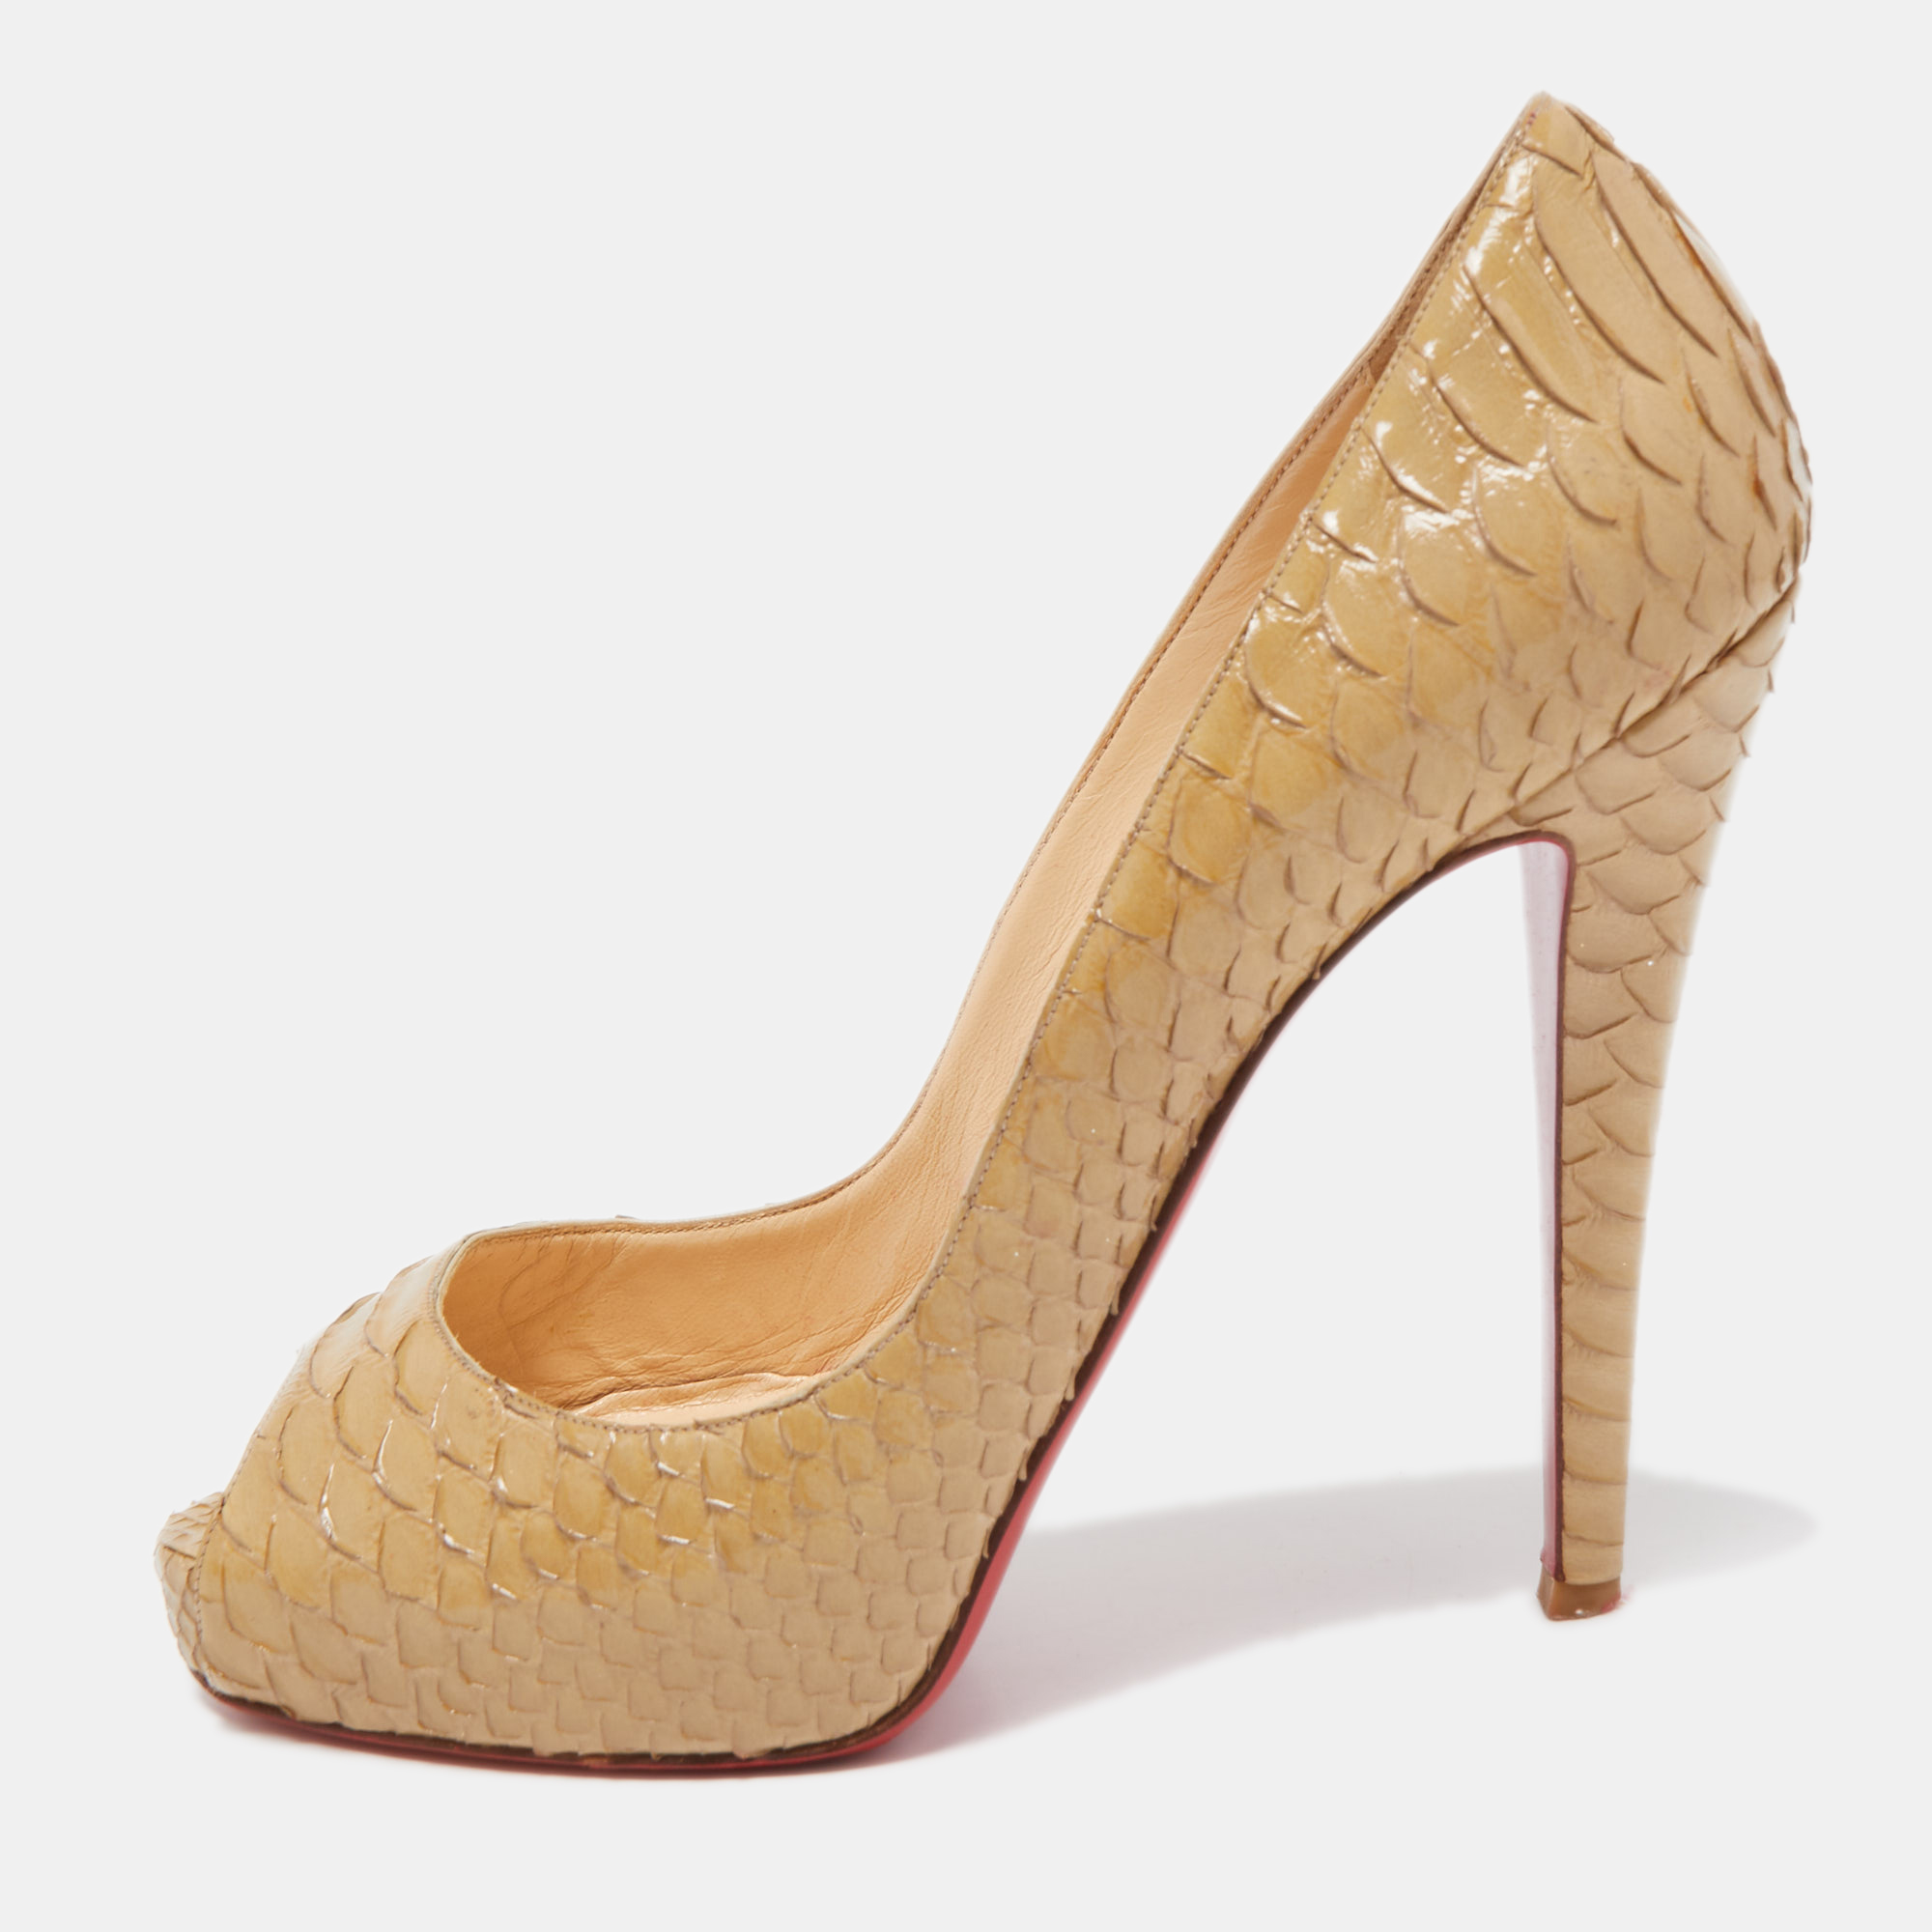 Pre-owned Christian Louboutin Green Python New Very Prive Pumps Size 38.5